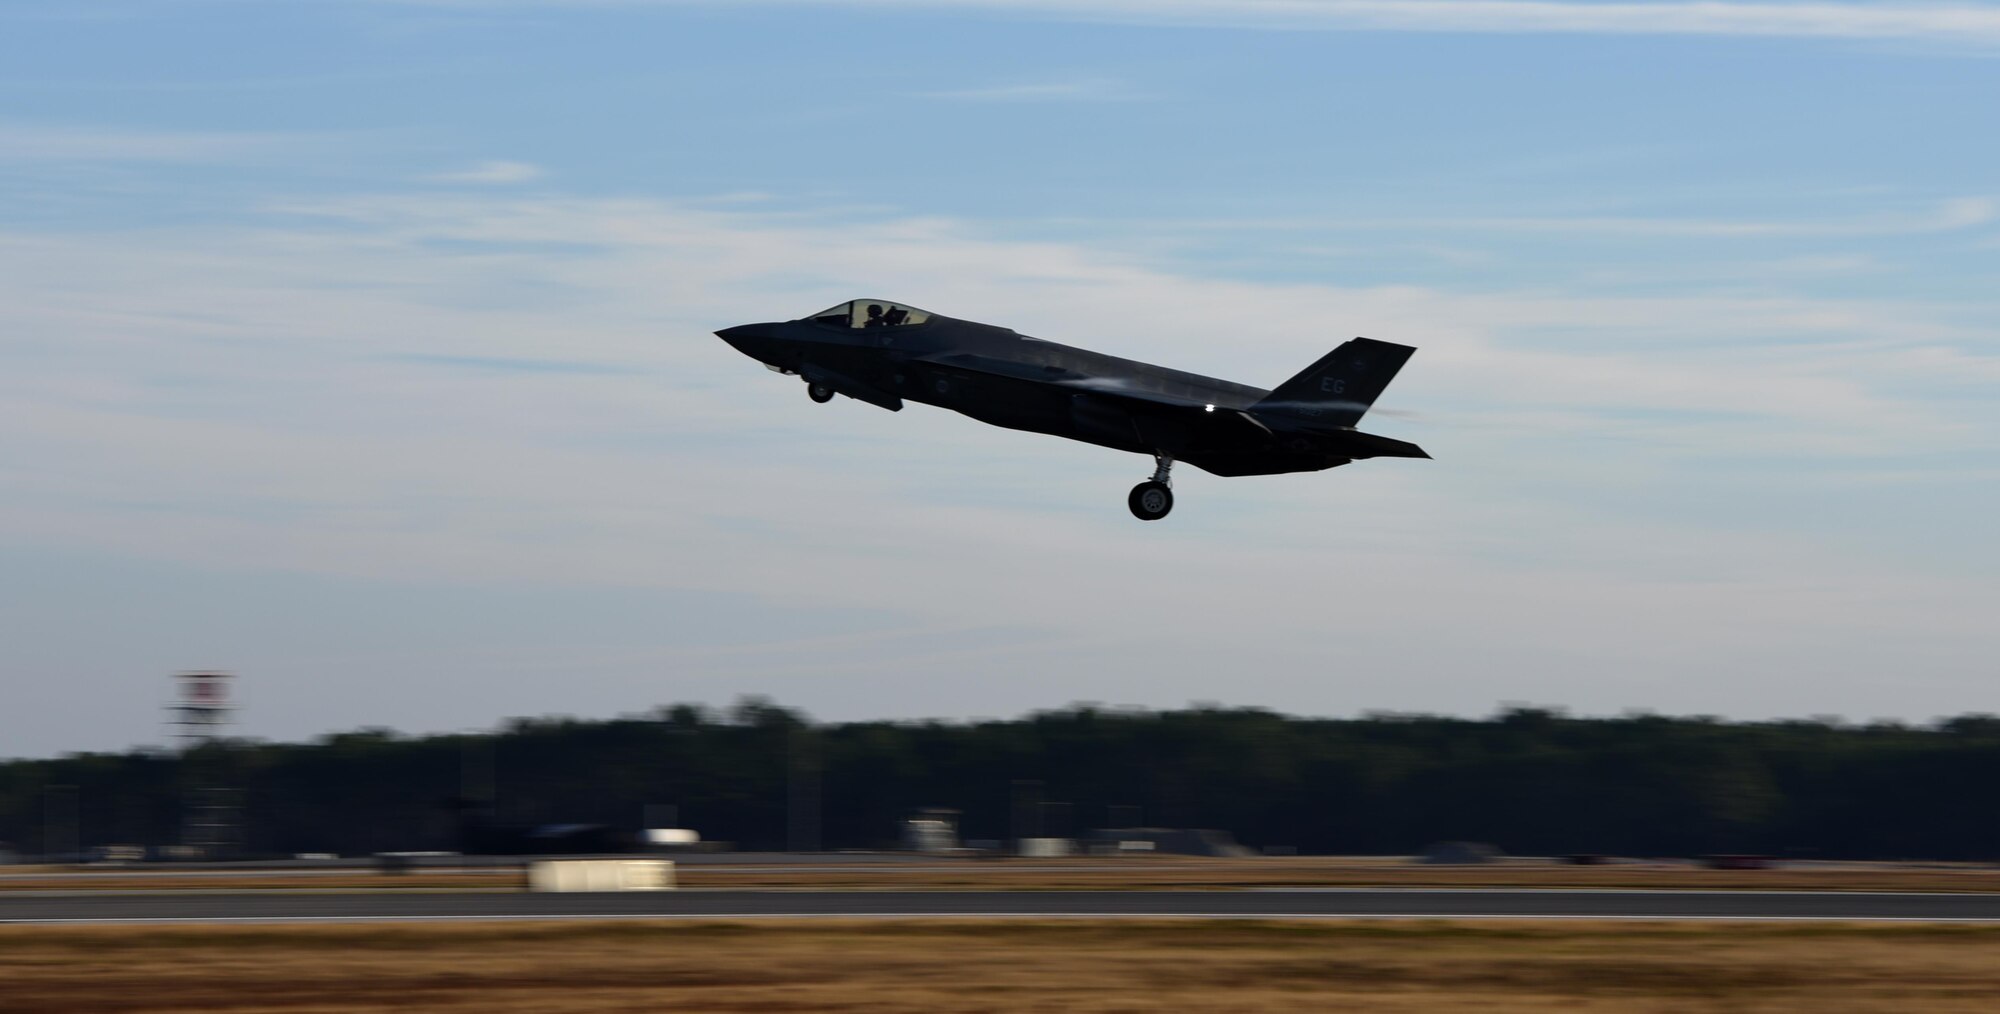 An F-35A Lightning II takes off to practice combat sorties with over 60 other aircraft in exercise Checkered Flag Dec. 8, 2016, at Tyndall Air Force Base, Florida. The 33d Fighter Wing deployed six F-35A Lightning II and 95 personnel to Checkered Flag 17-1. Checkered Flag is a combat rehearsal where 15 aircraft platforms take to the skies to fly realistic and large-scale operations to prepare for contingency operations.  Specifically, this exercise tested the range of capabilities for the F-35A and the 33 FW student and instructor pilots, maintainers, air battle managers and intel by operating from two locations. (U.S. Air Force photo by Staff Sgt. Peter Thompson)